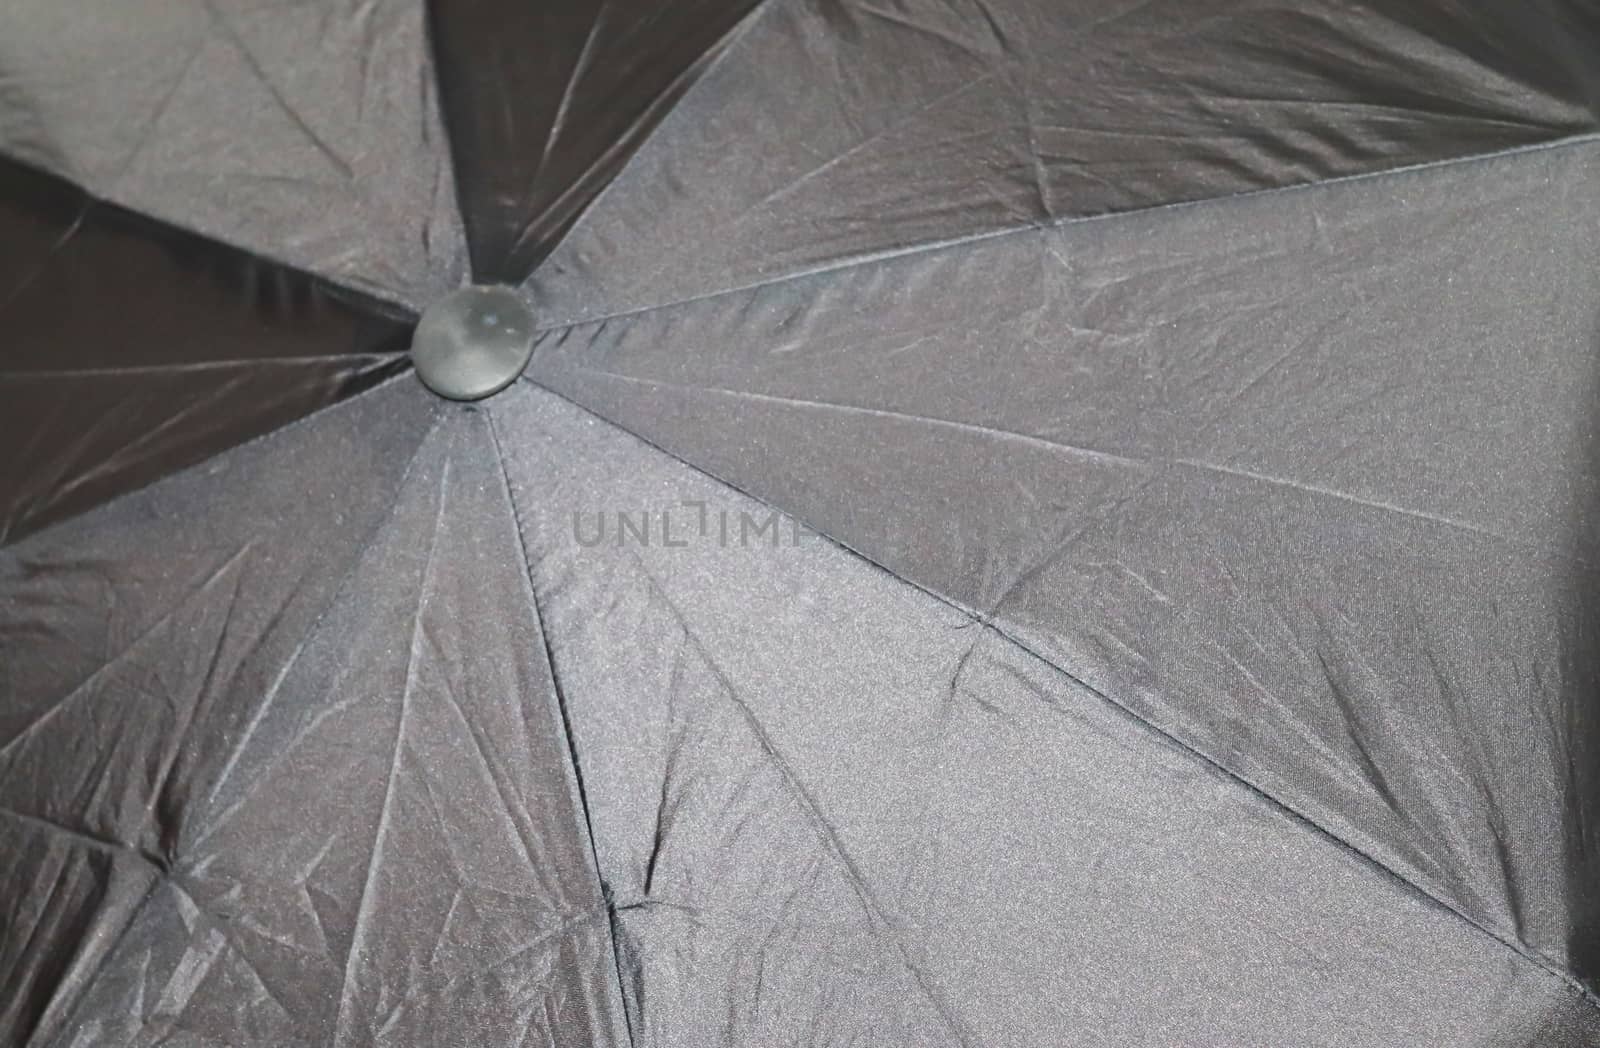 Close up view at the colorful surfaces of a rainproof umbrella by MP_foto71